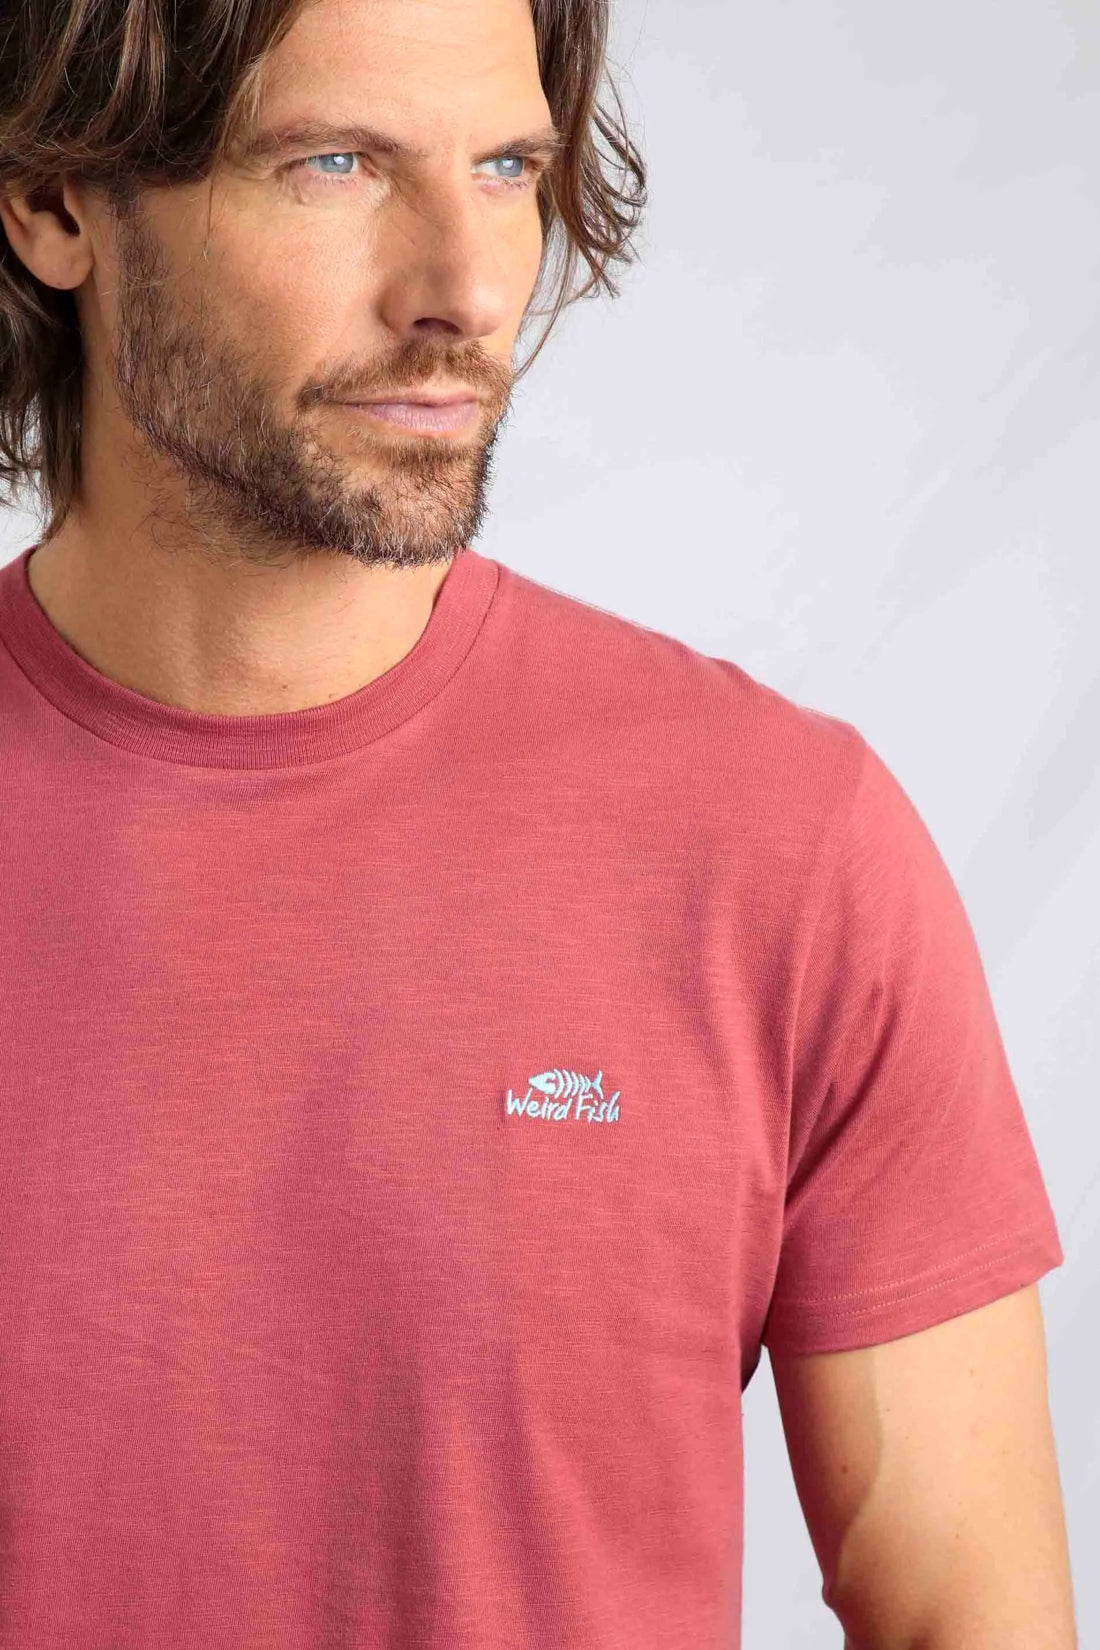 Weird Fish men's Rosewood coloured Fished t-shirt with contrast coloured chest emblem.